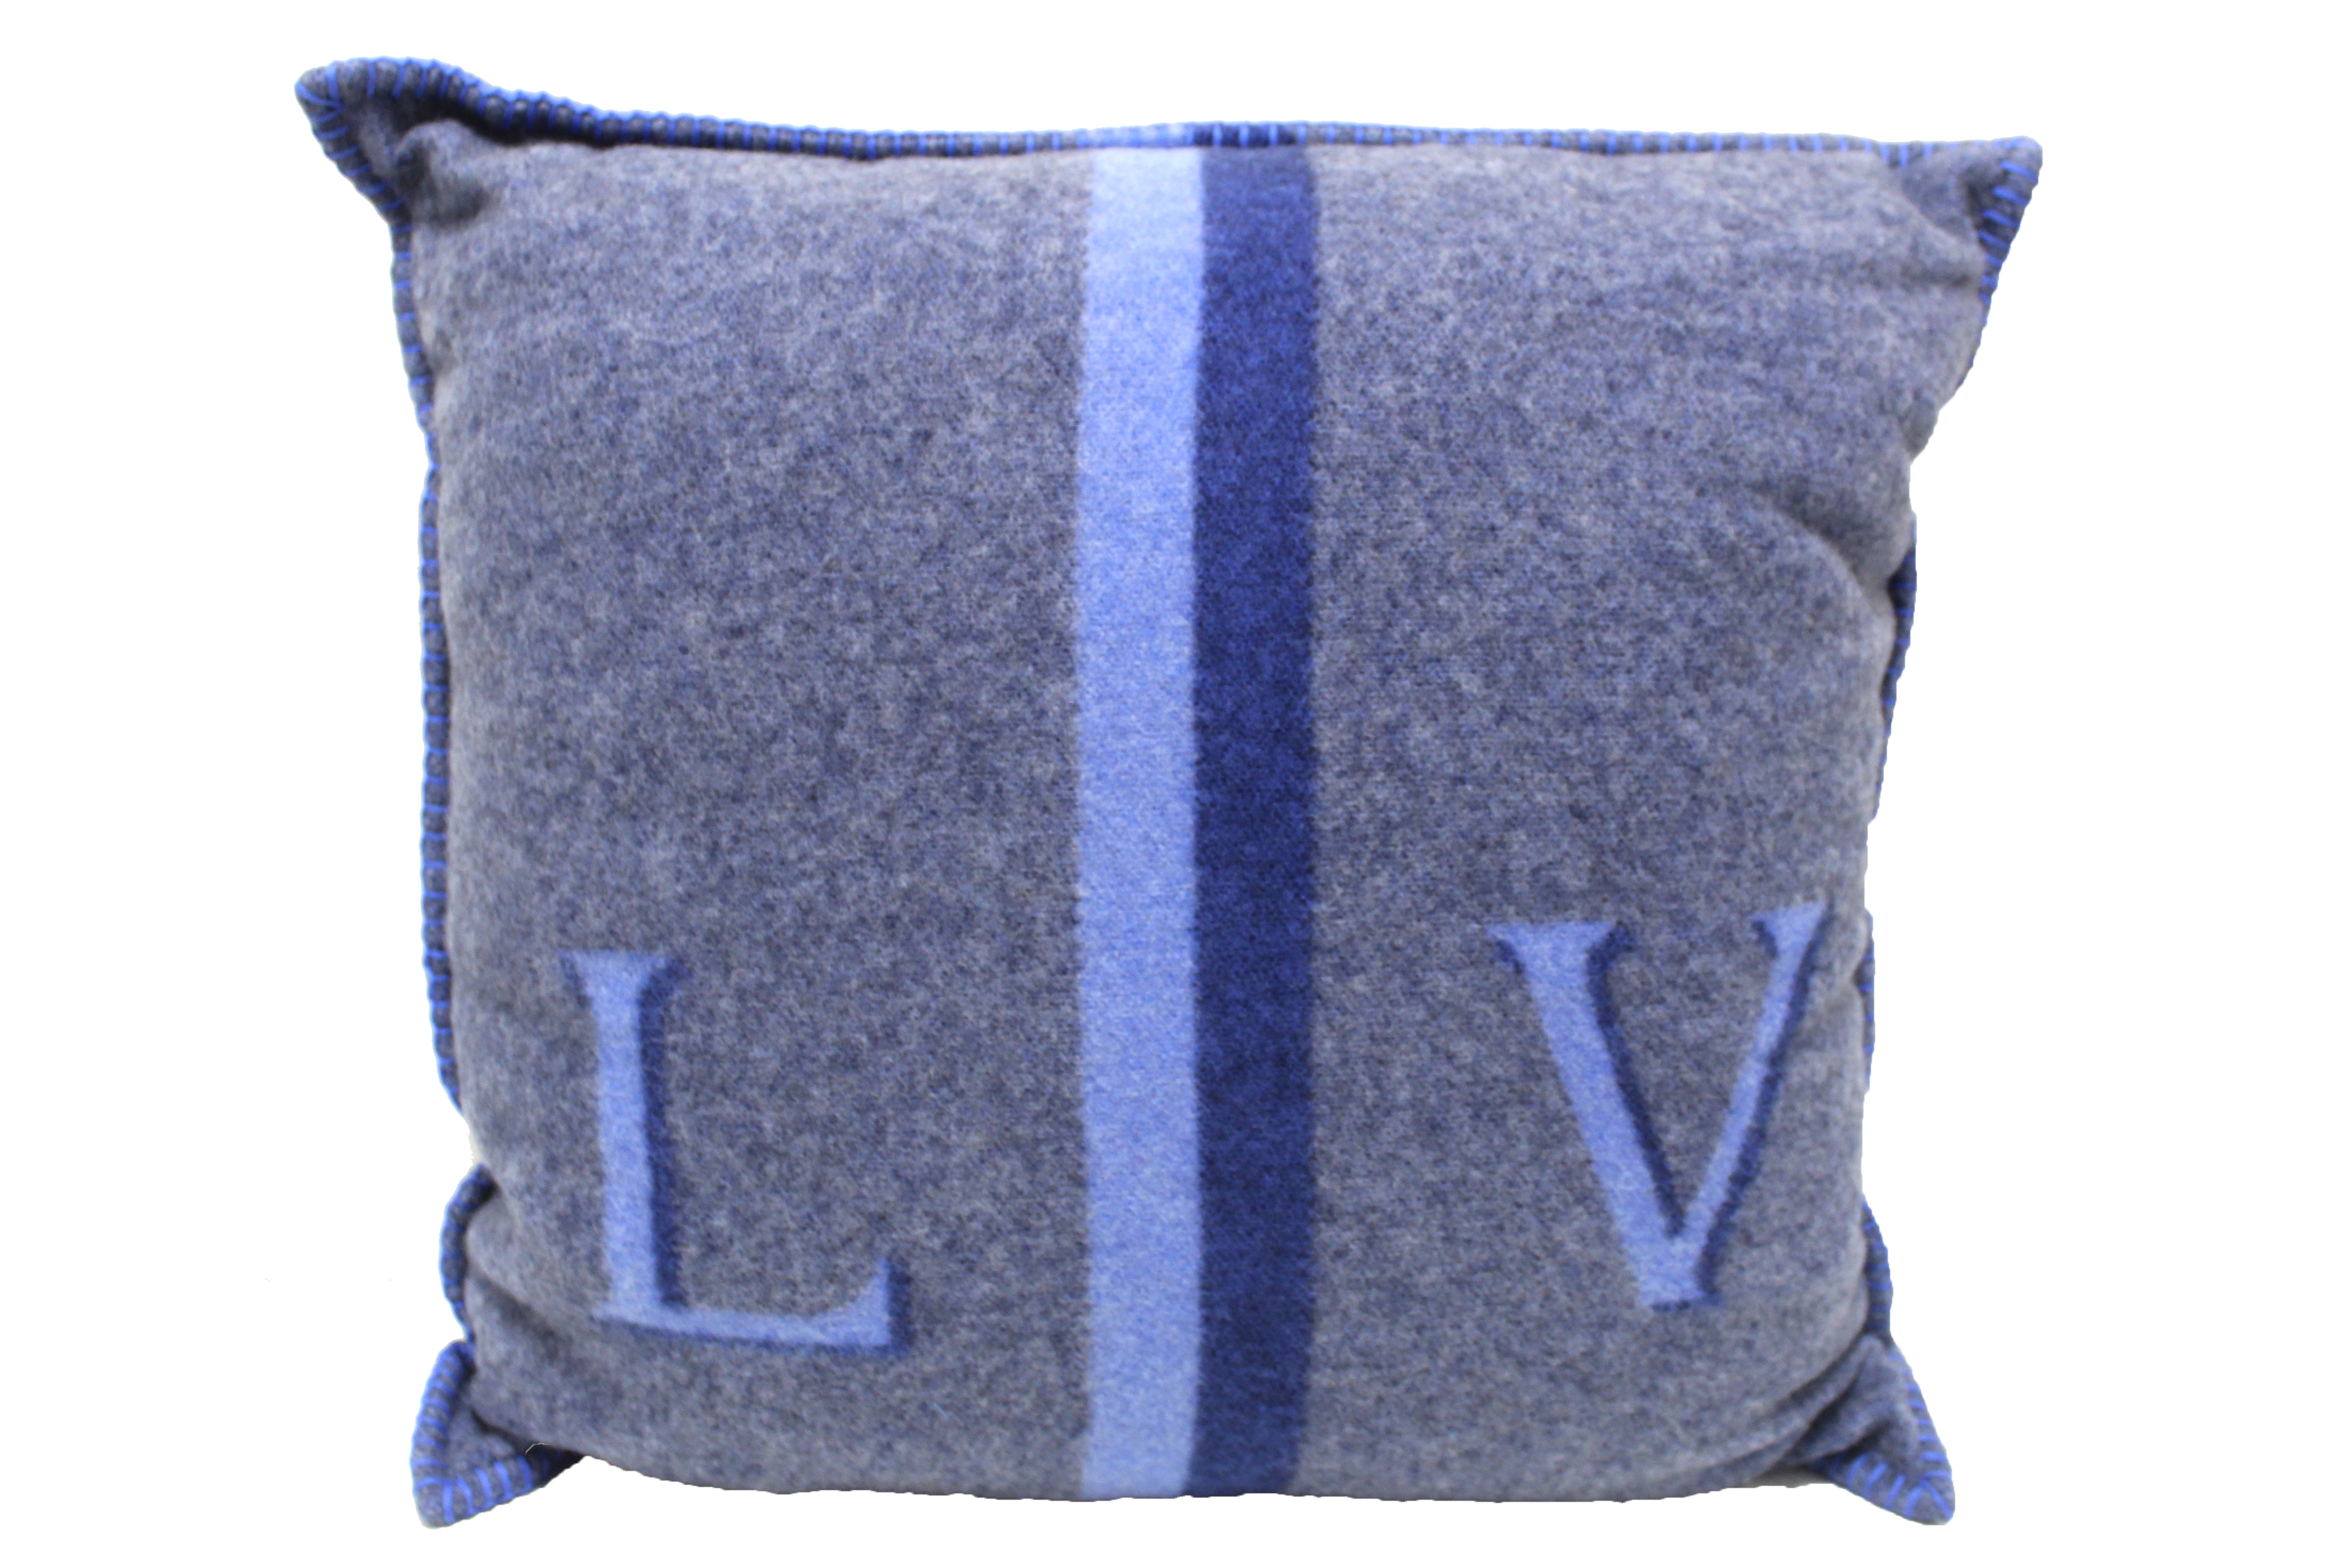 Authentic NEW Louis Vuitton Blue/Gray Wool Cashmere Cushion Pillow